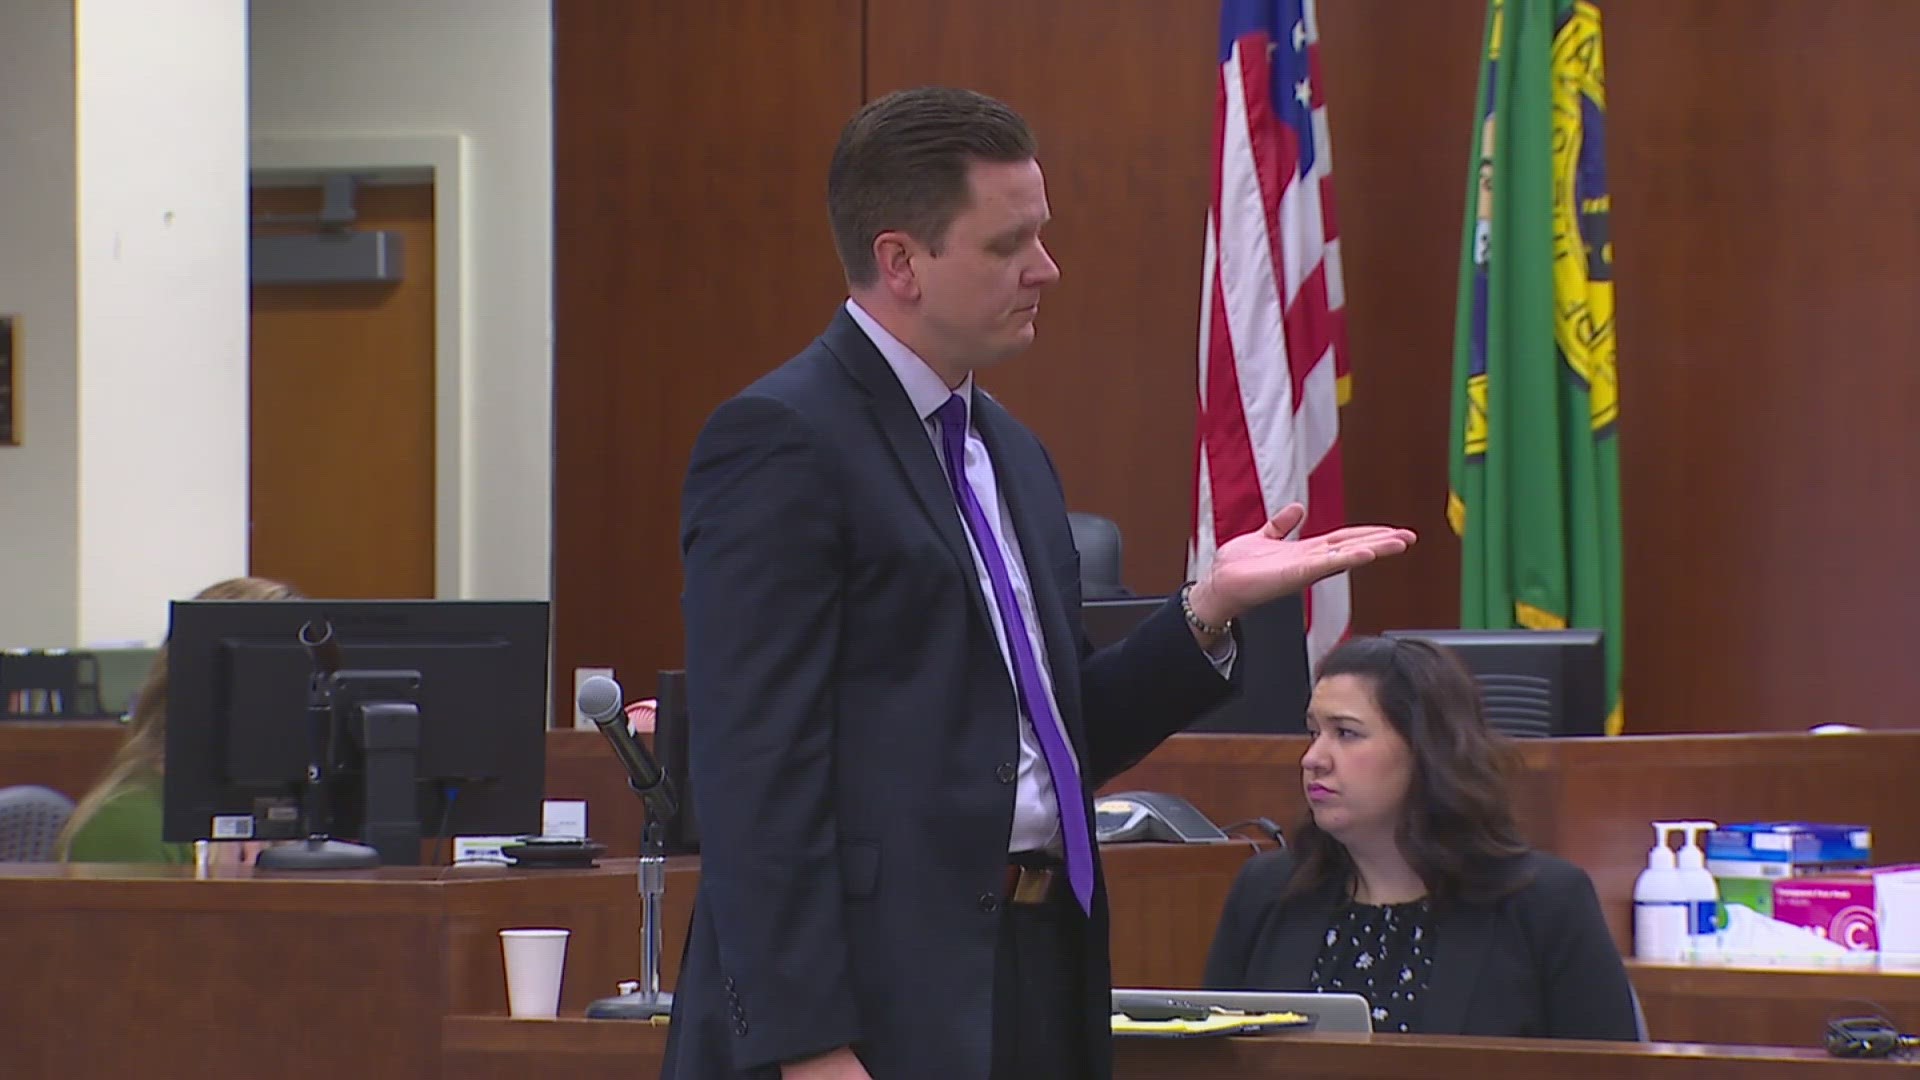 On Friday, a Snohomish County jury heard closing arguments in the trial of Richard Rotter.